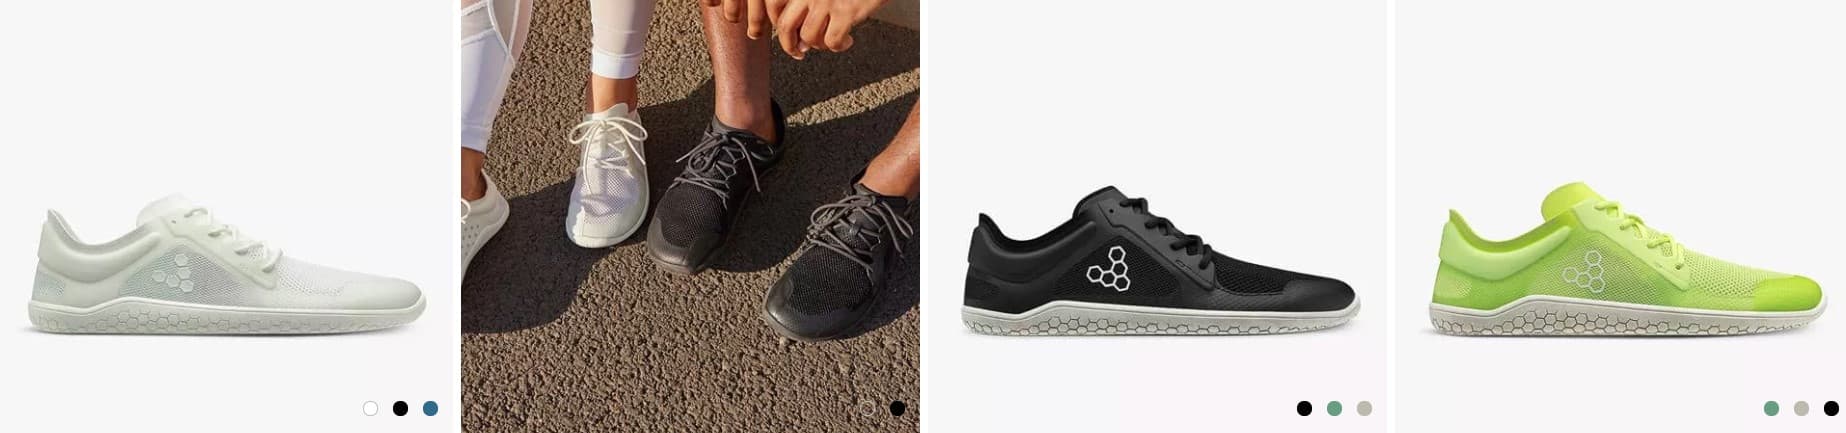 Where to find Vivobarefoot coupon?